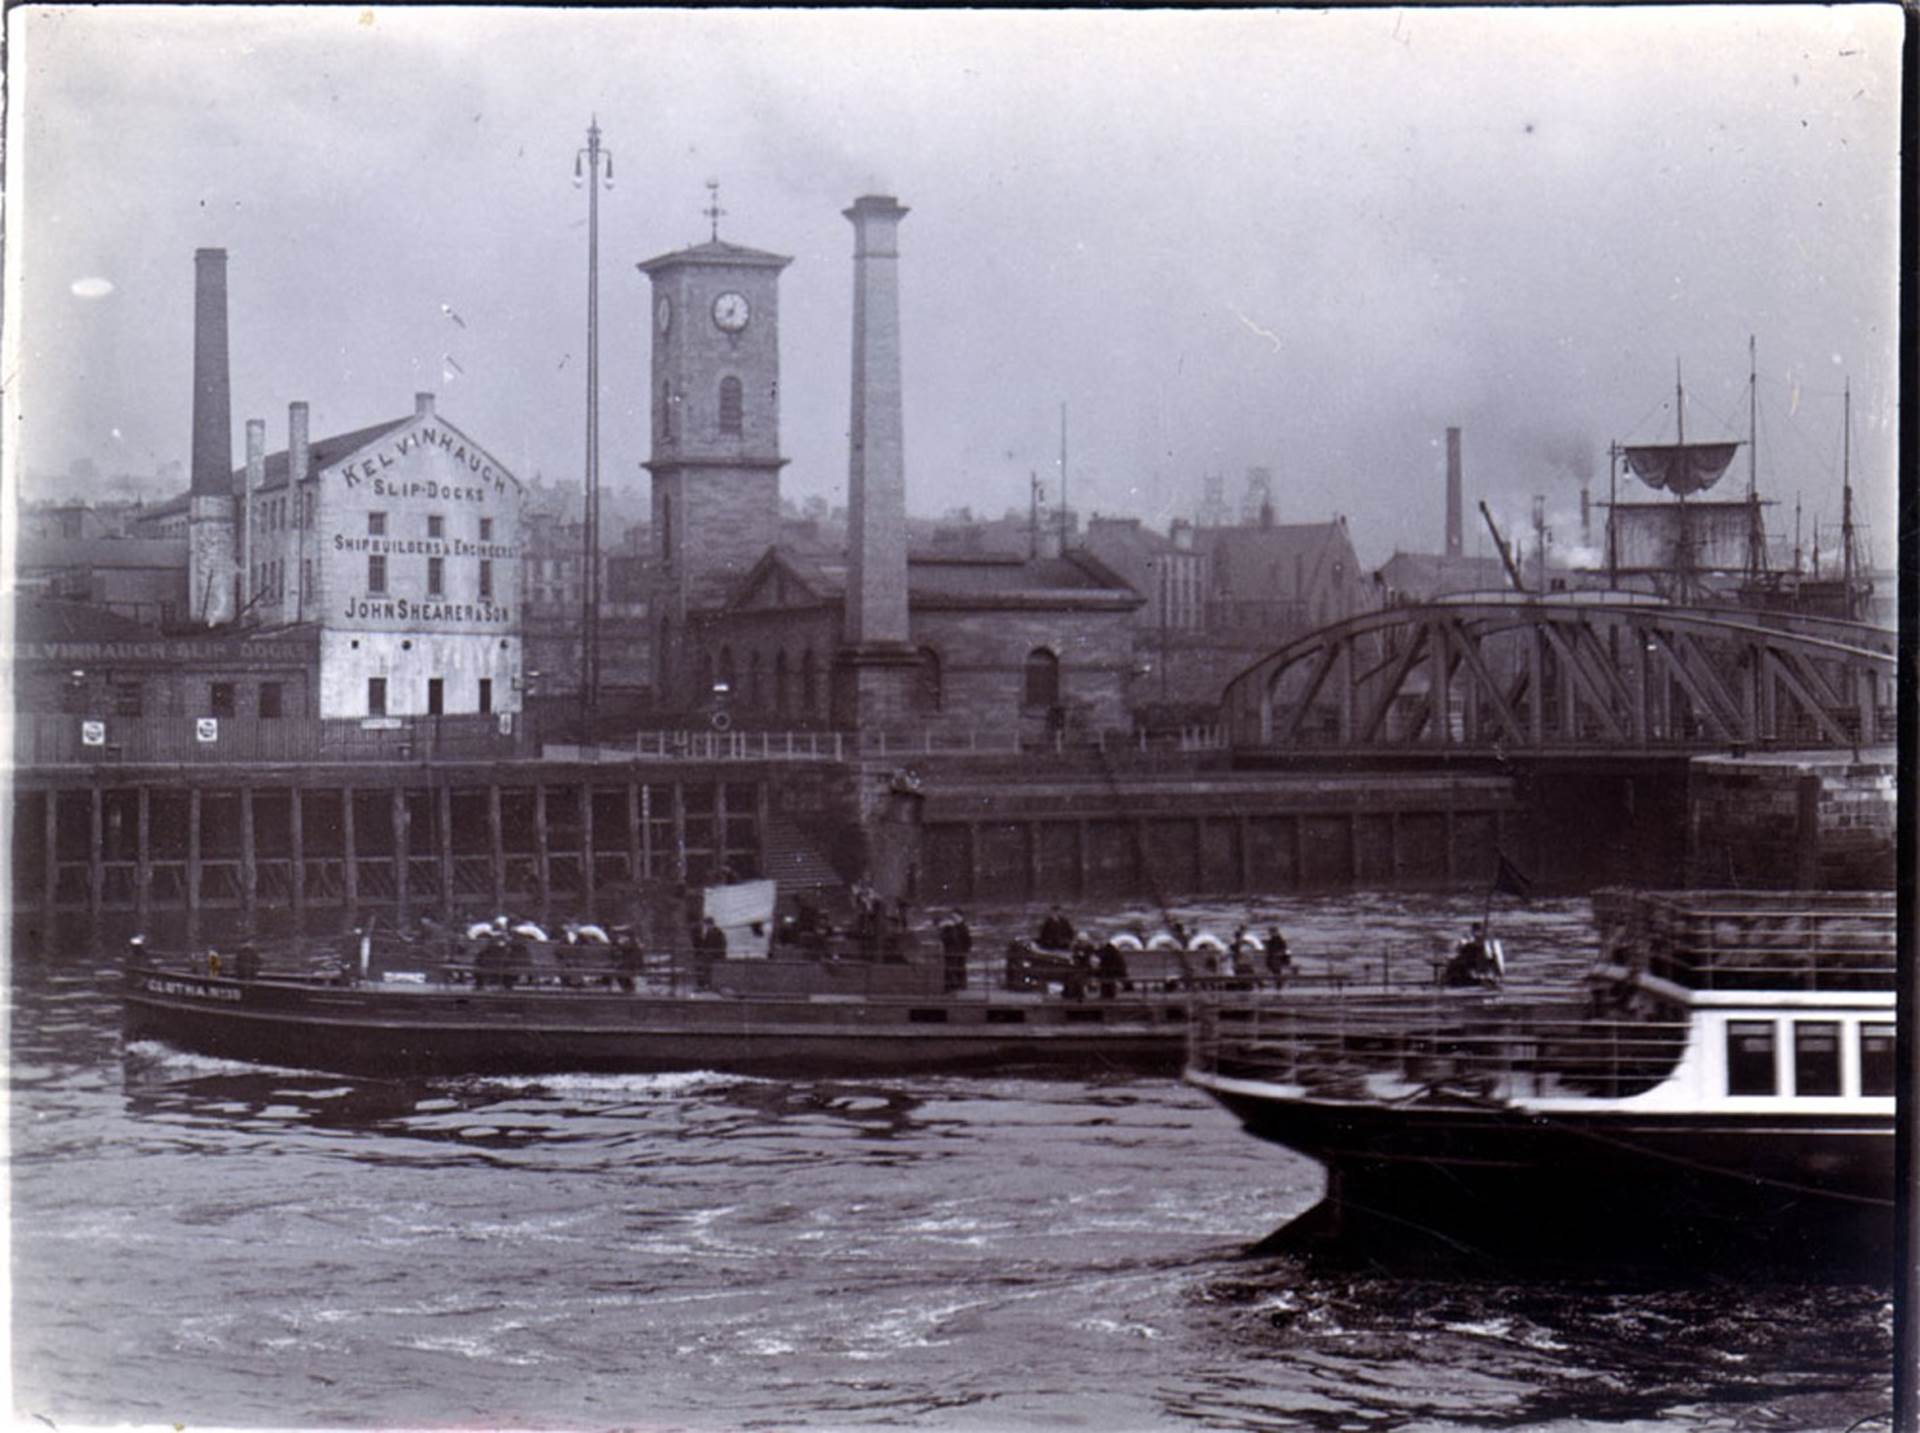 Old Clutha boats on the River Clyde passing the old Pumphouse building, which now houses the Clydeside Distillery